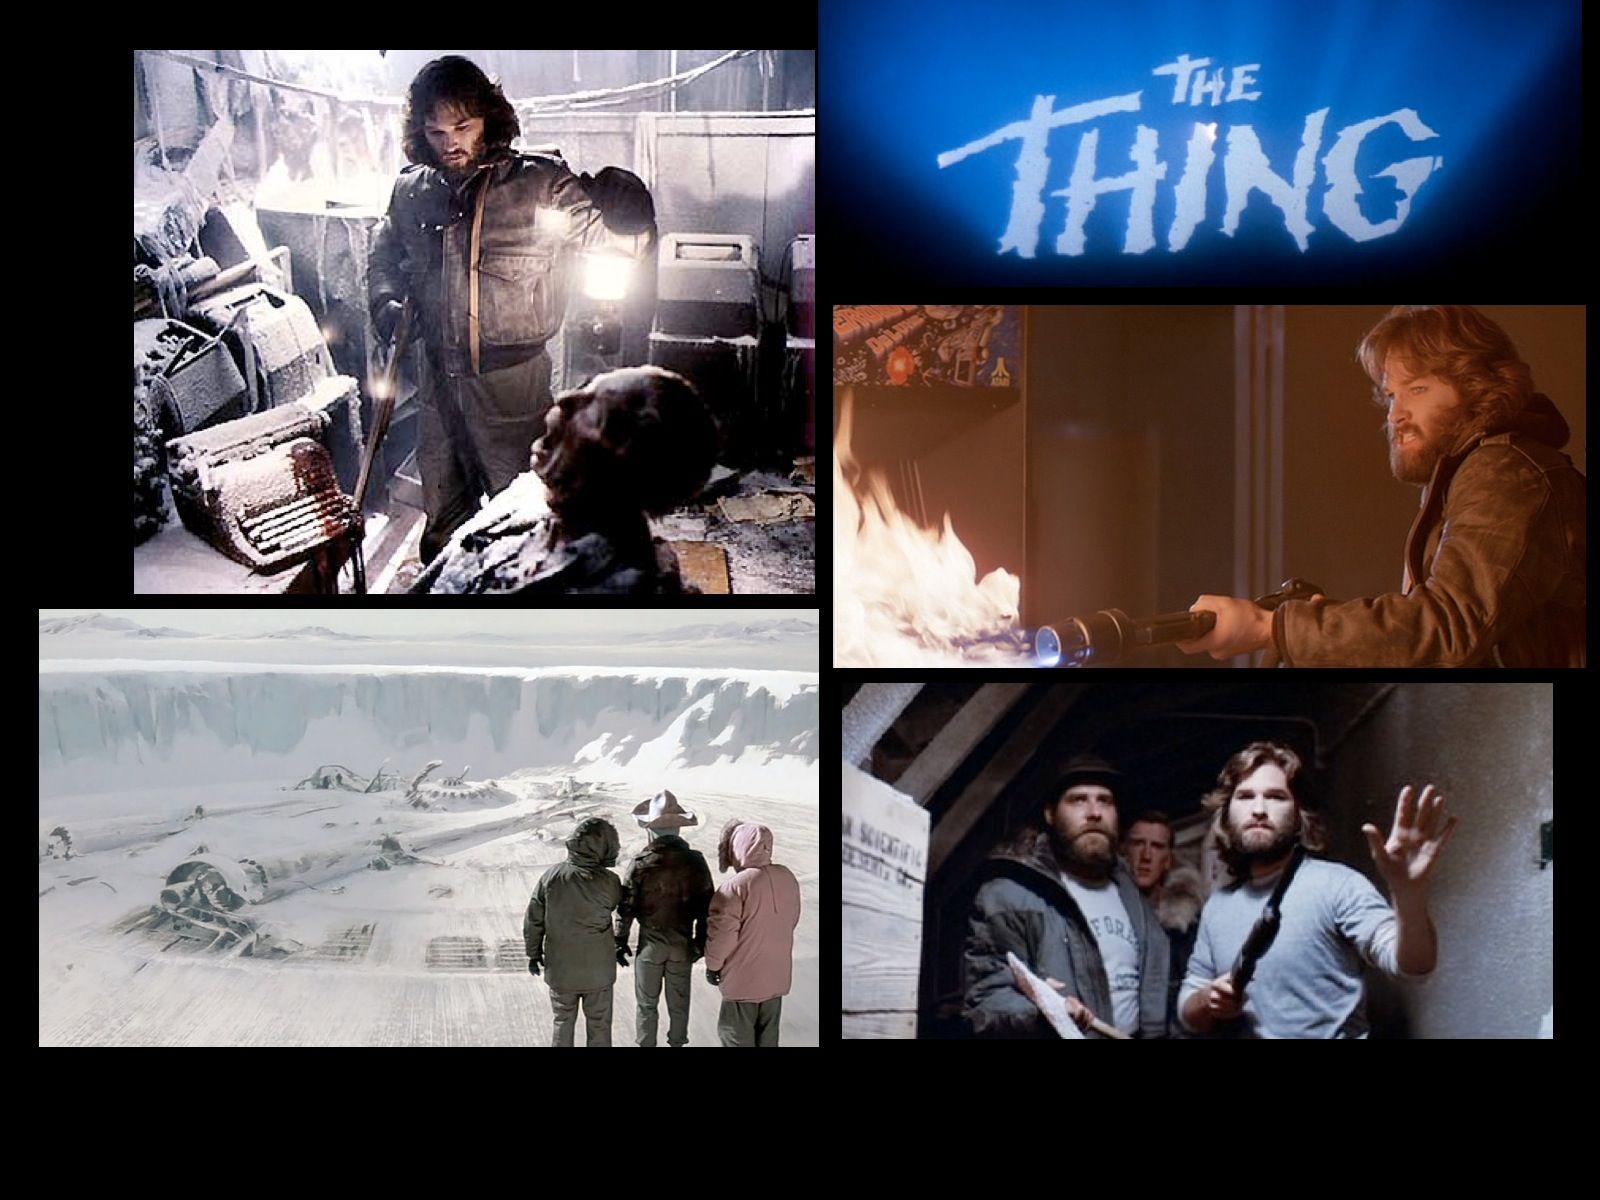 The Thing HD wallpaper. Download The Thing desktop background